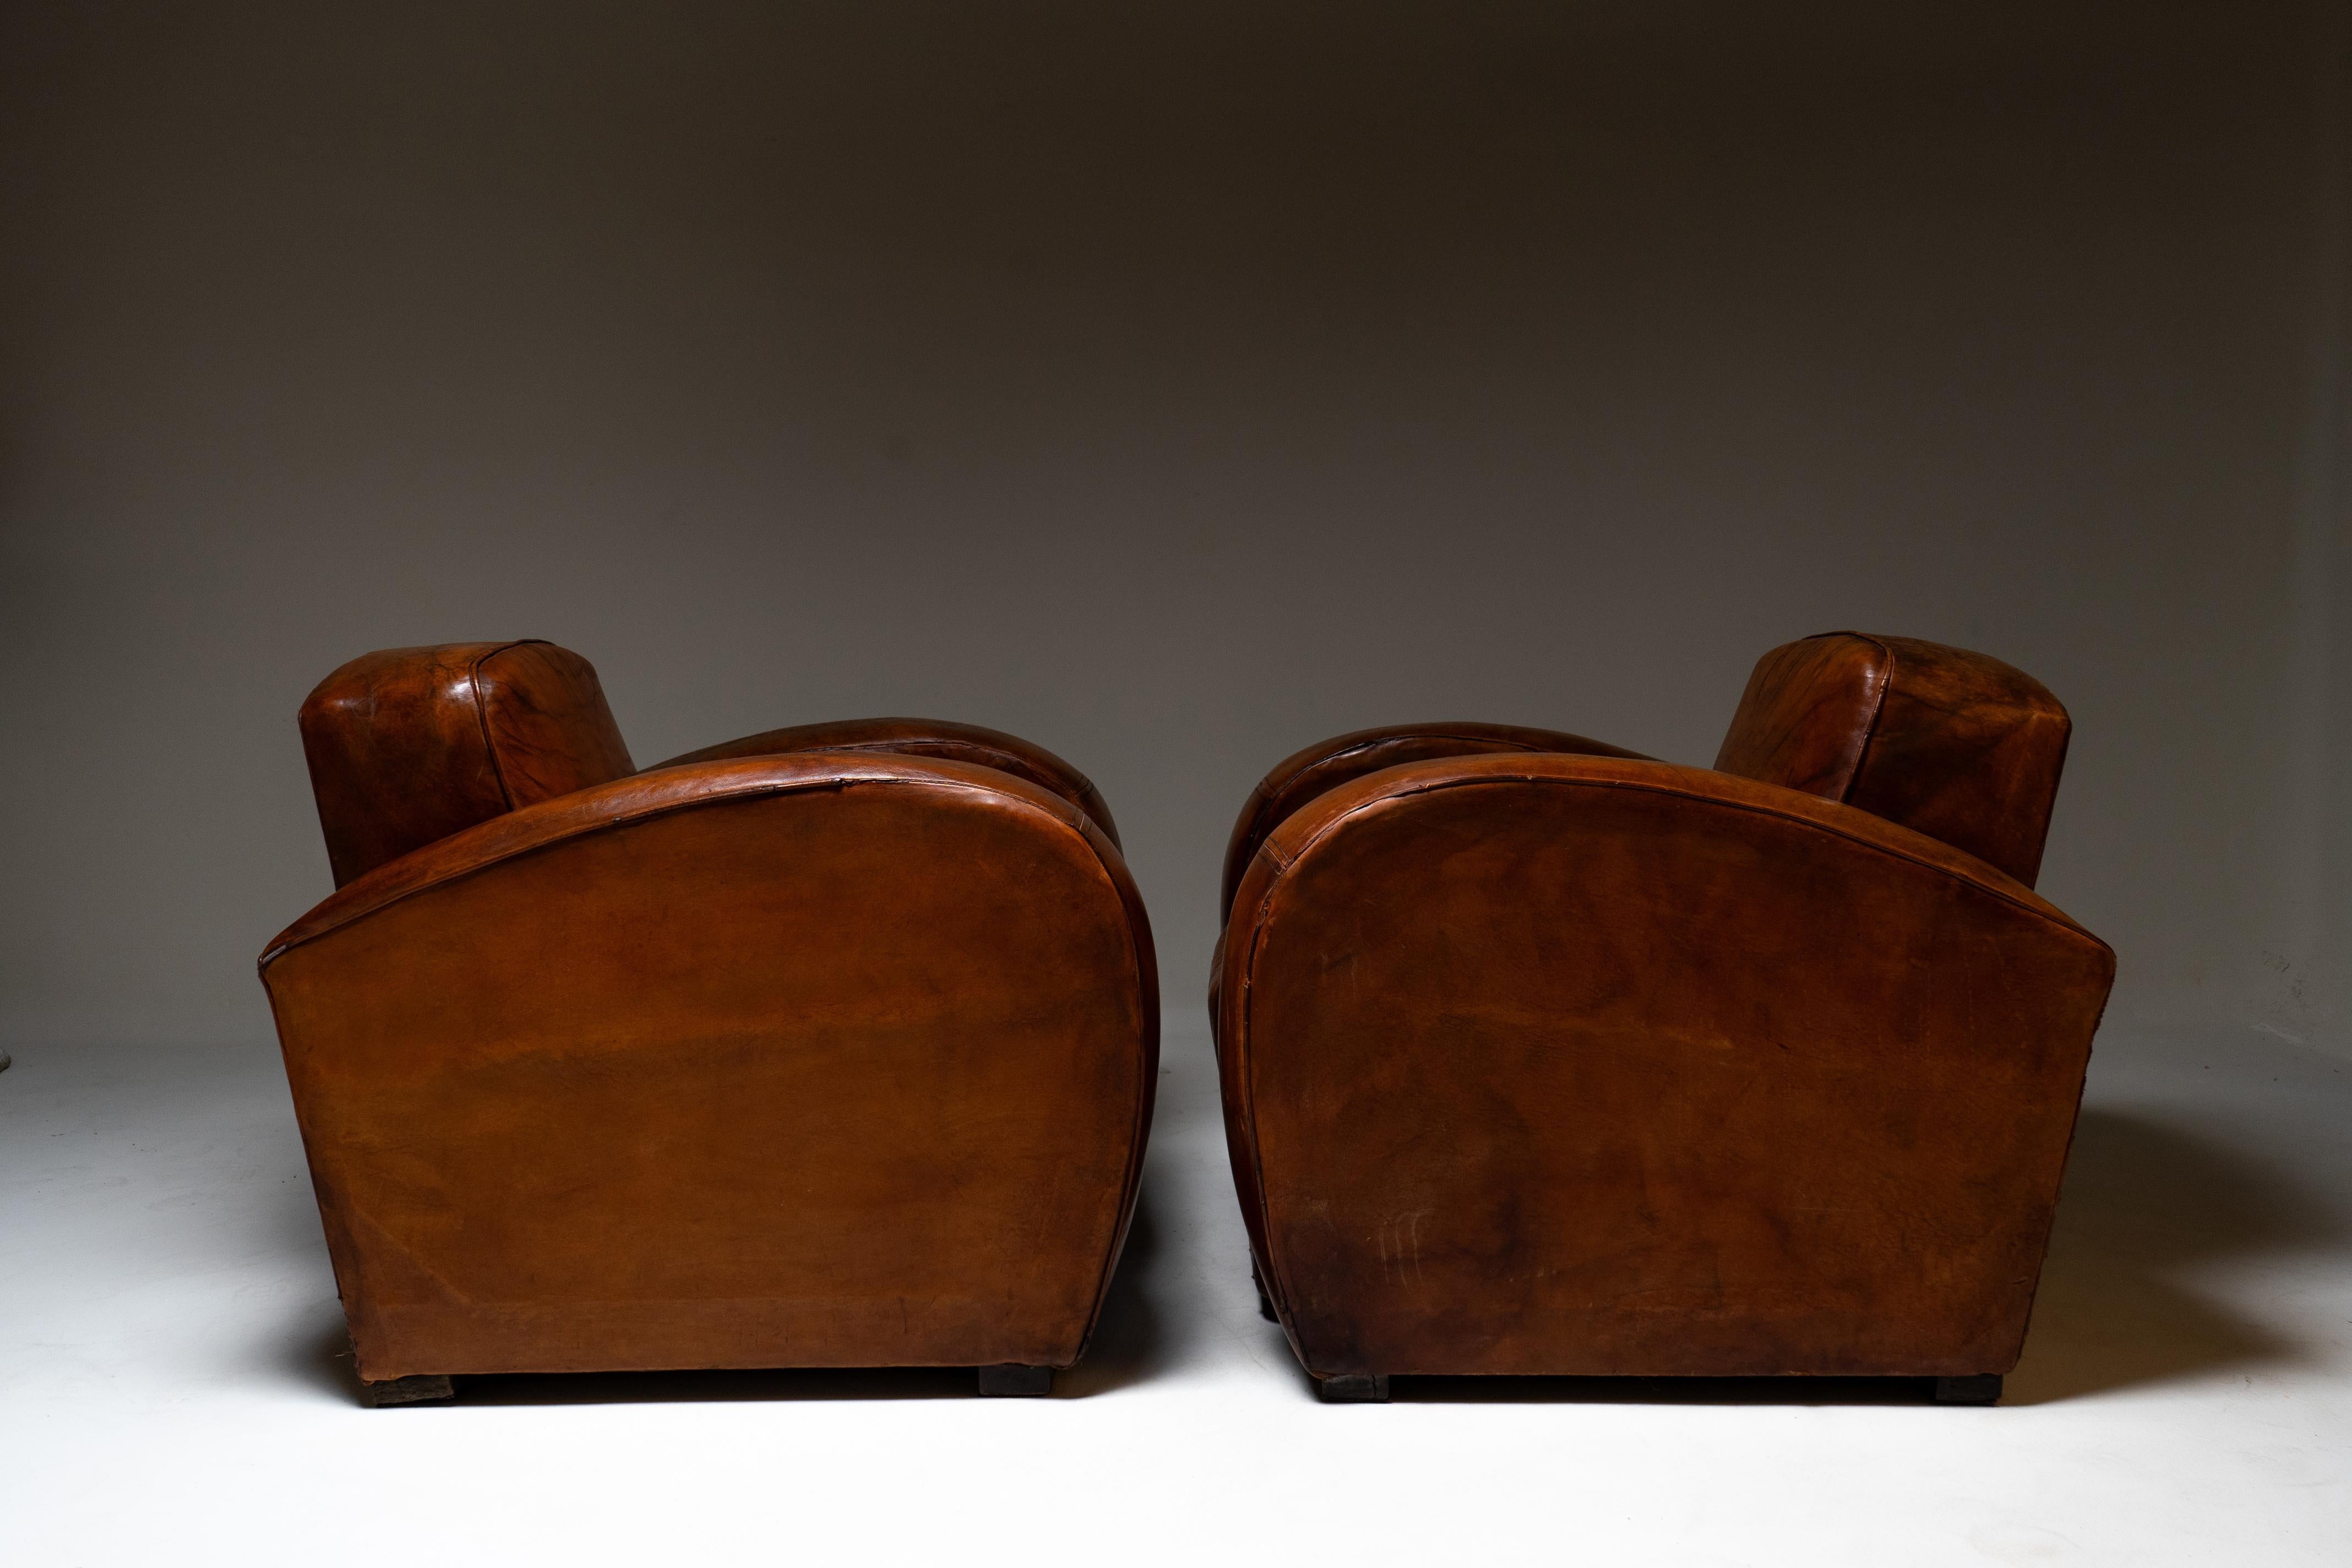 A Pair of Art Deco Leather Club Chairs, France c.1930 For Sale 6